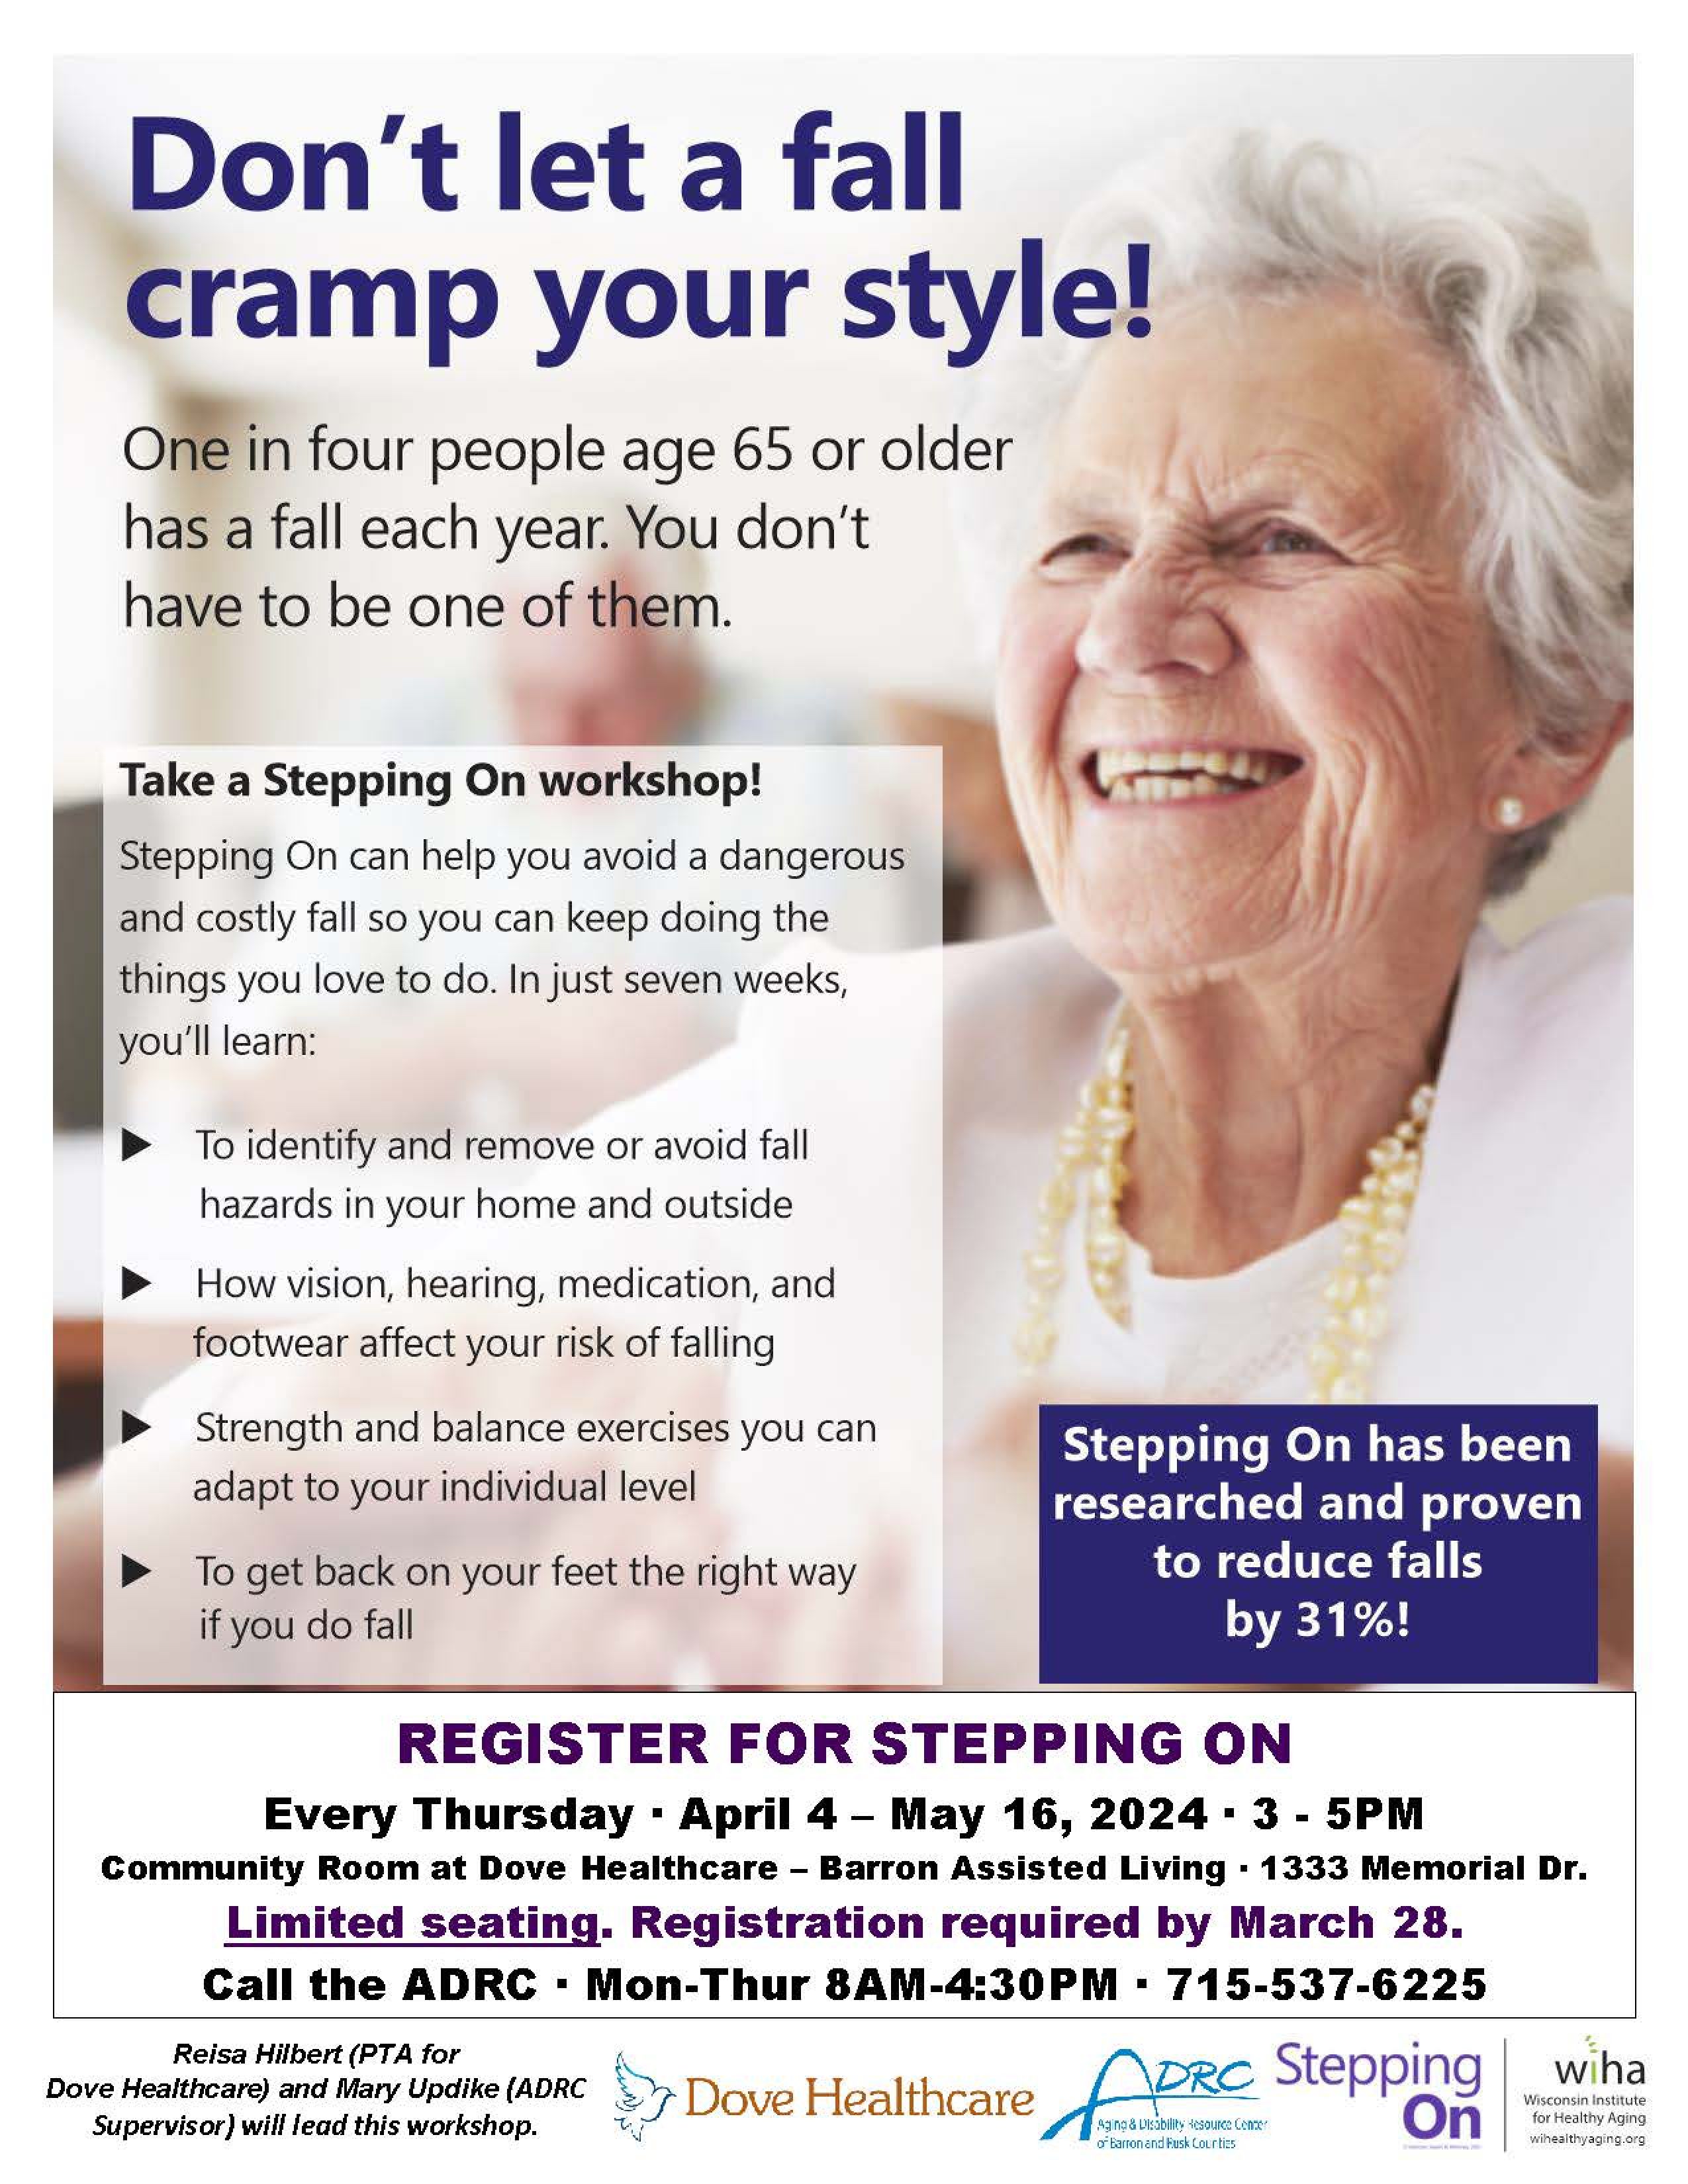 Stepping On: A 7-Week Fall Prevention Workshop in Barron